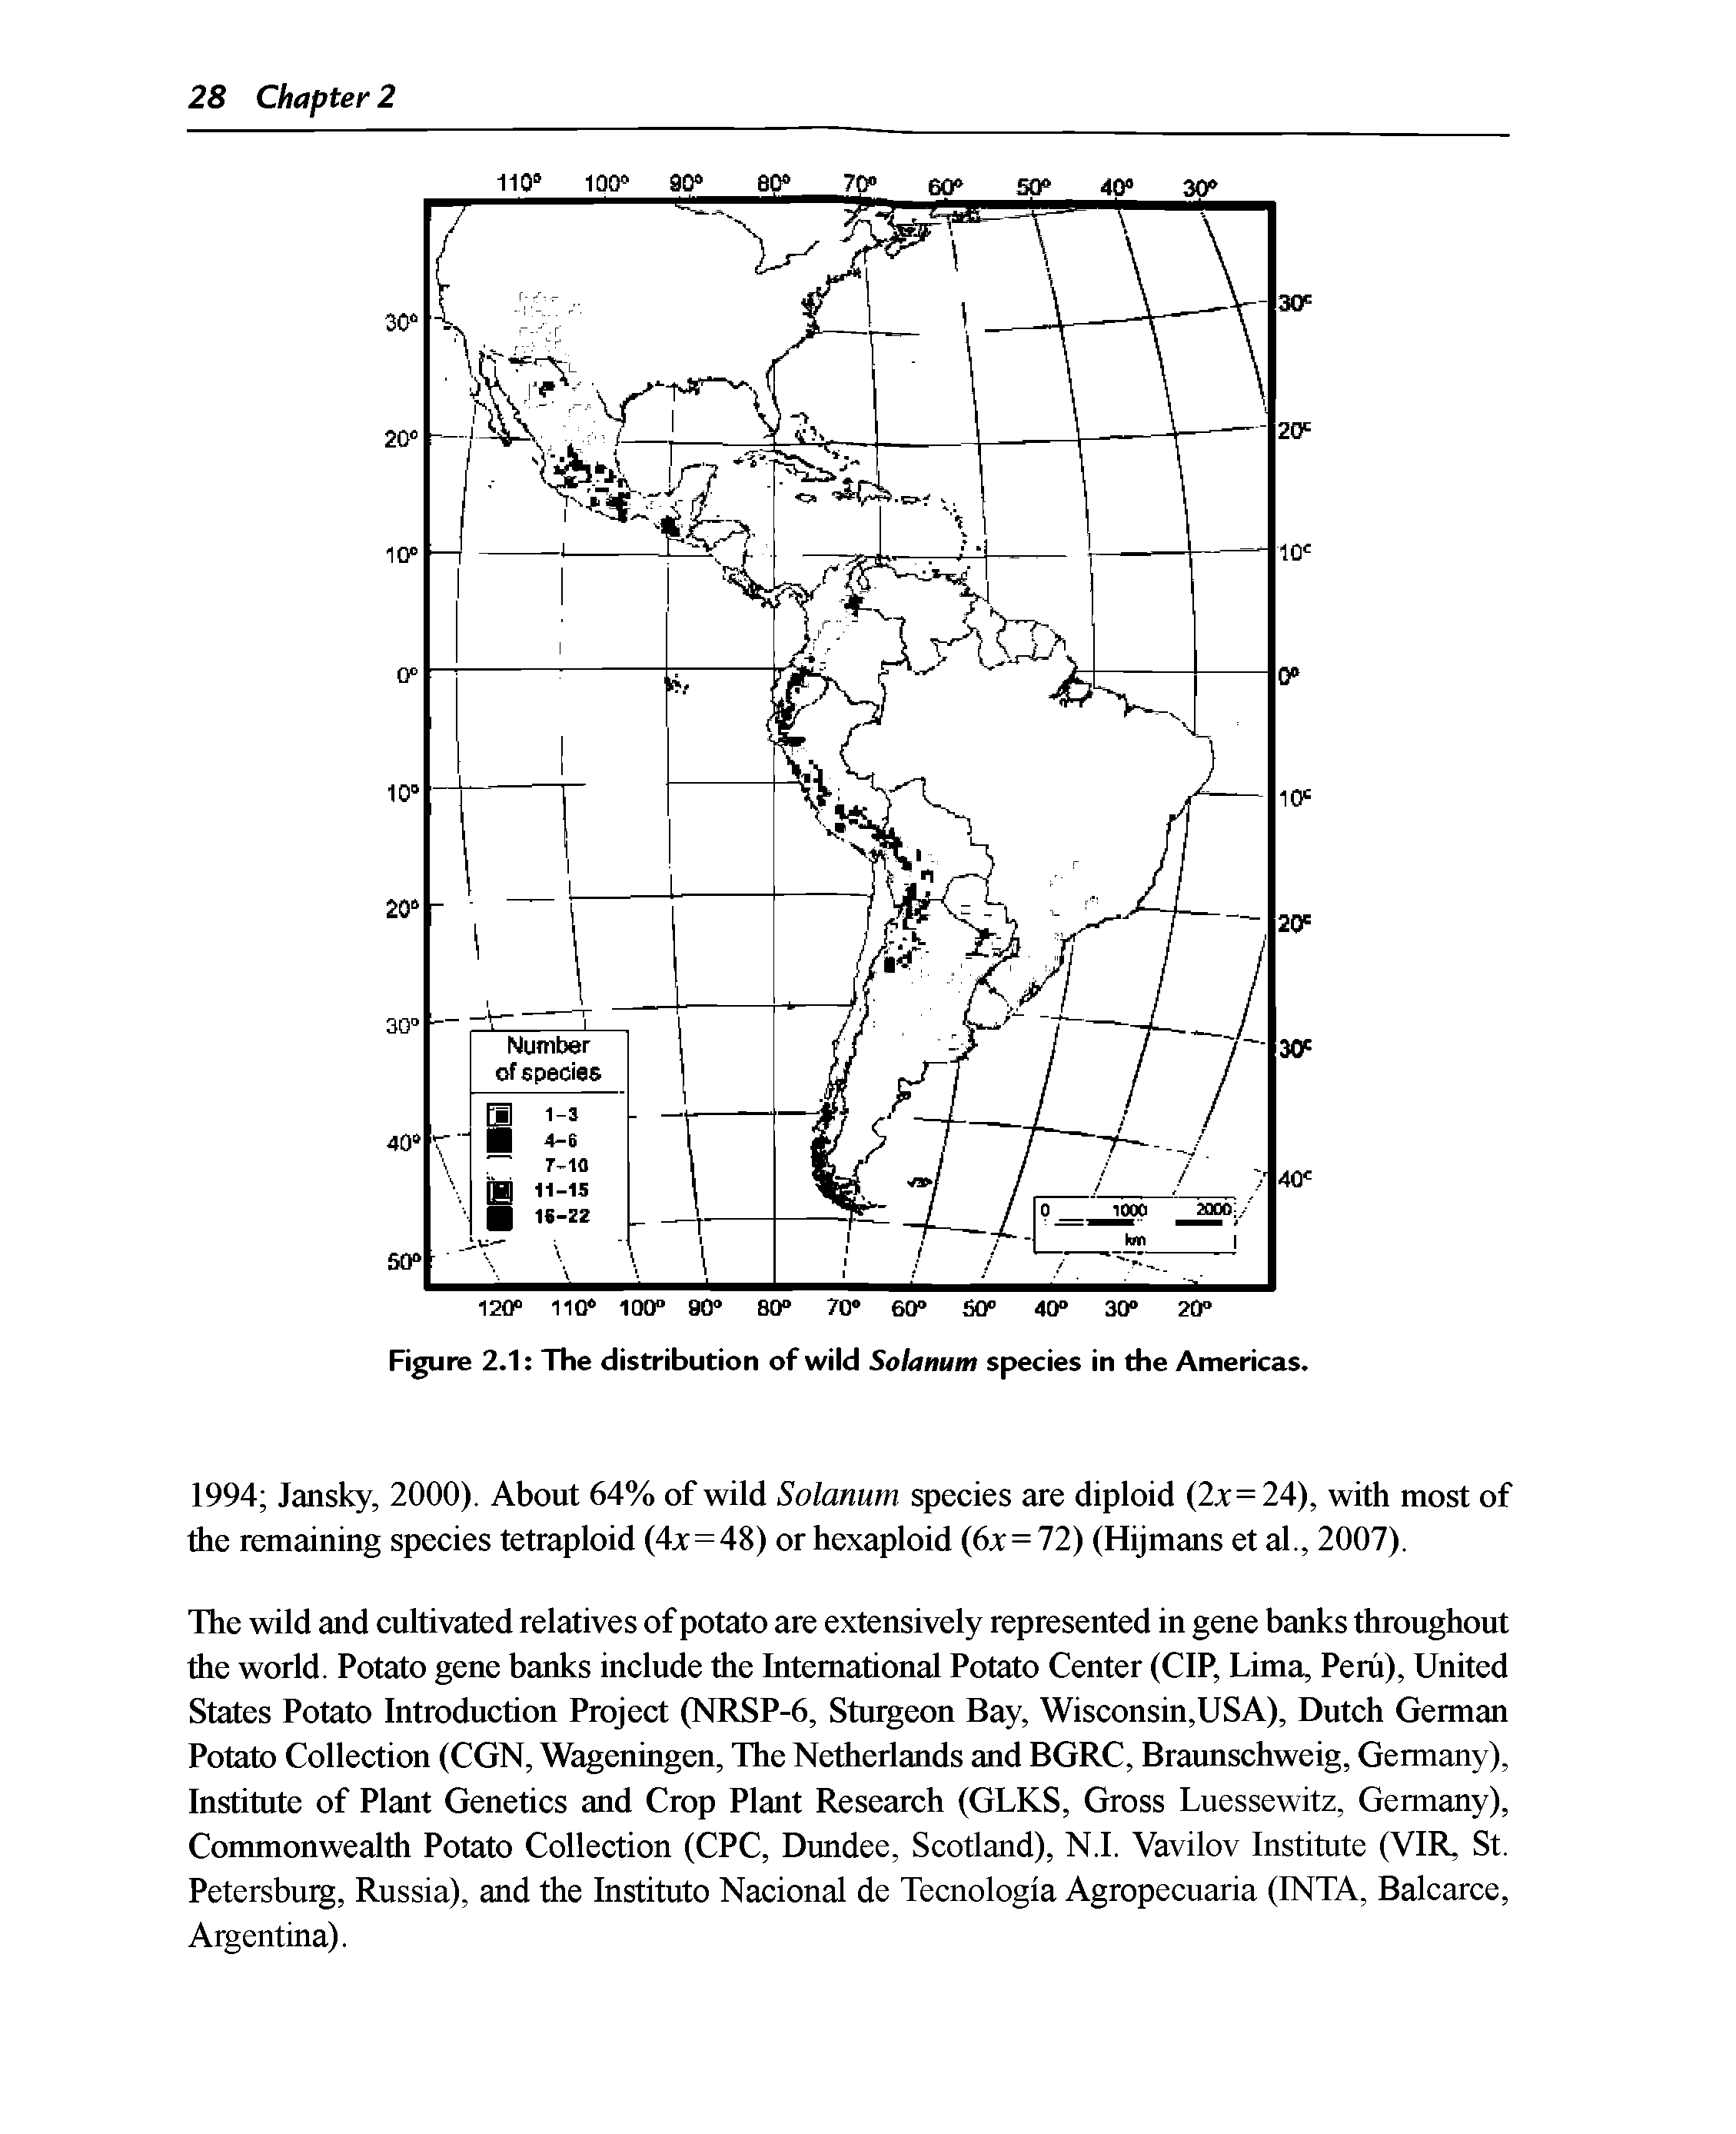 Figure 2.1 The distribution of wild Solanum species in the Americas.